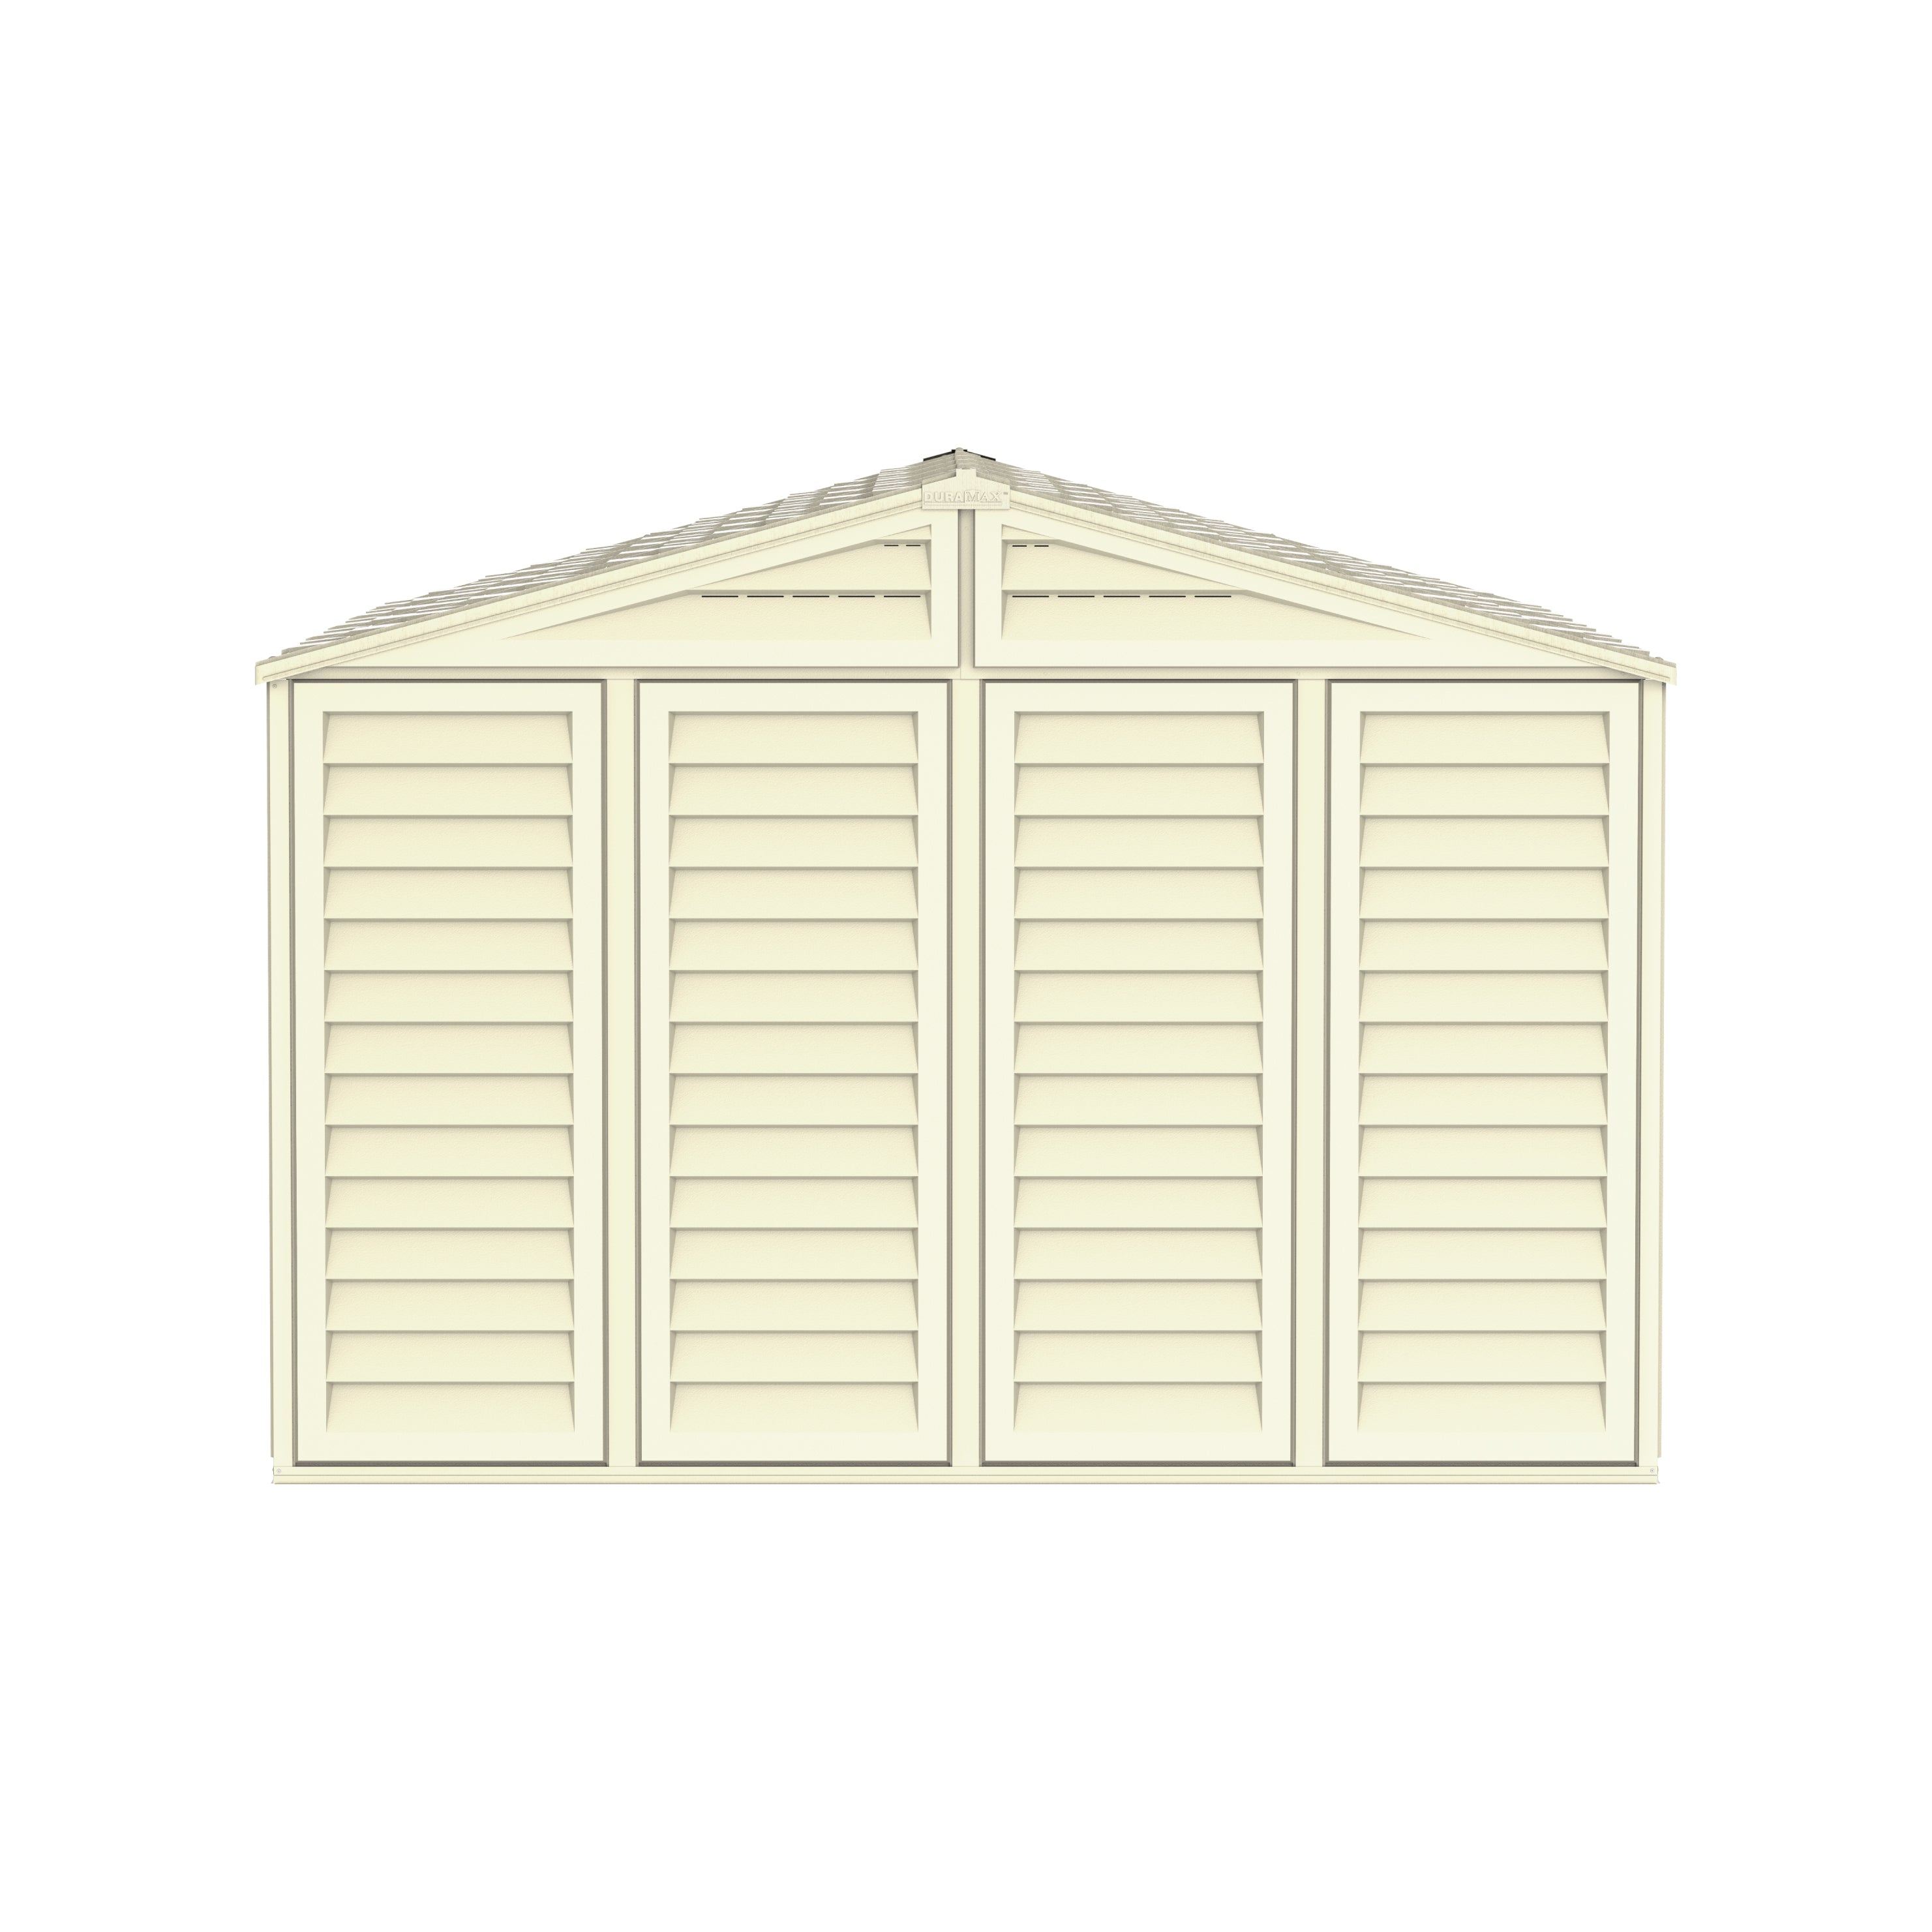 Garden Storage Shed with FREE Shelving Rack